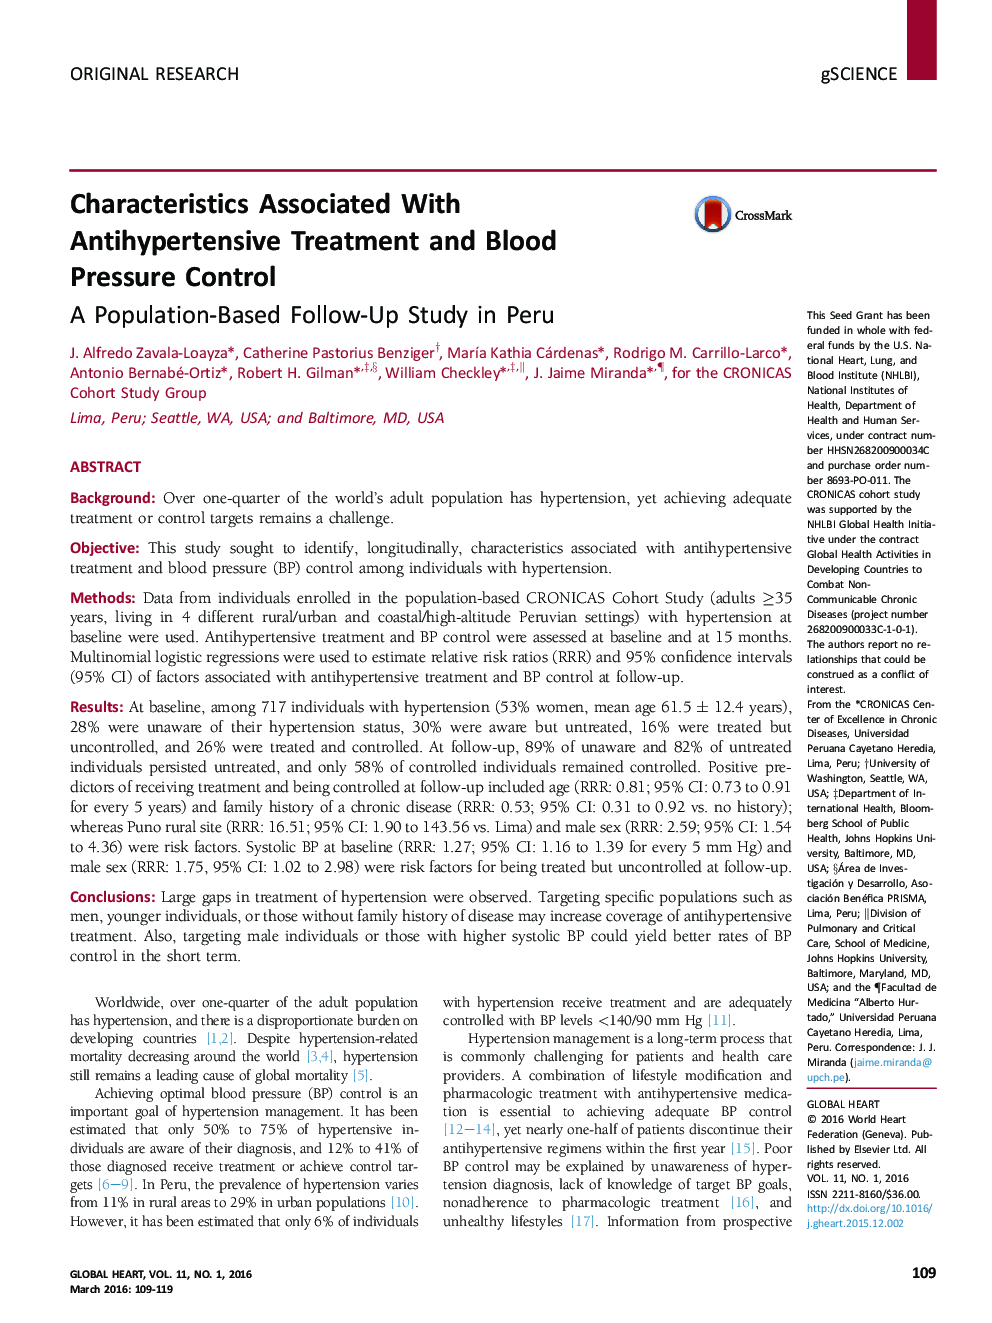 Characteristics Associated With Antihypertensive Treatment and Blood Pressure Control: A Population-Based Follow-Up Study in Peru